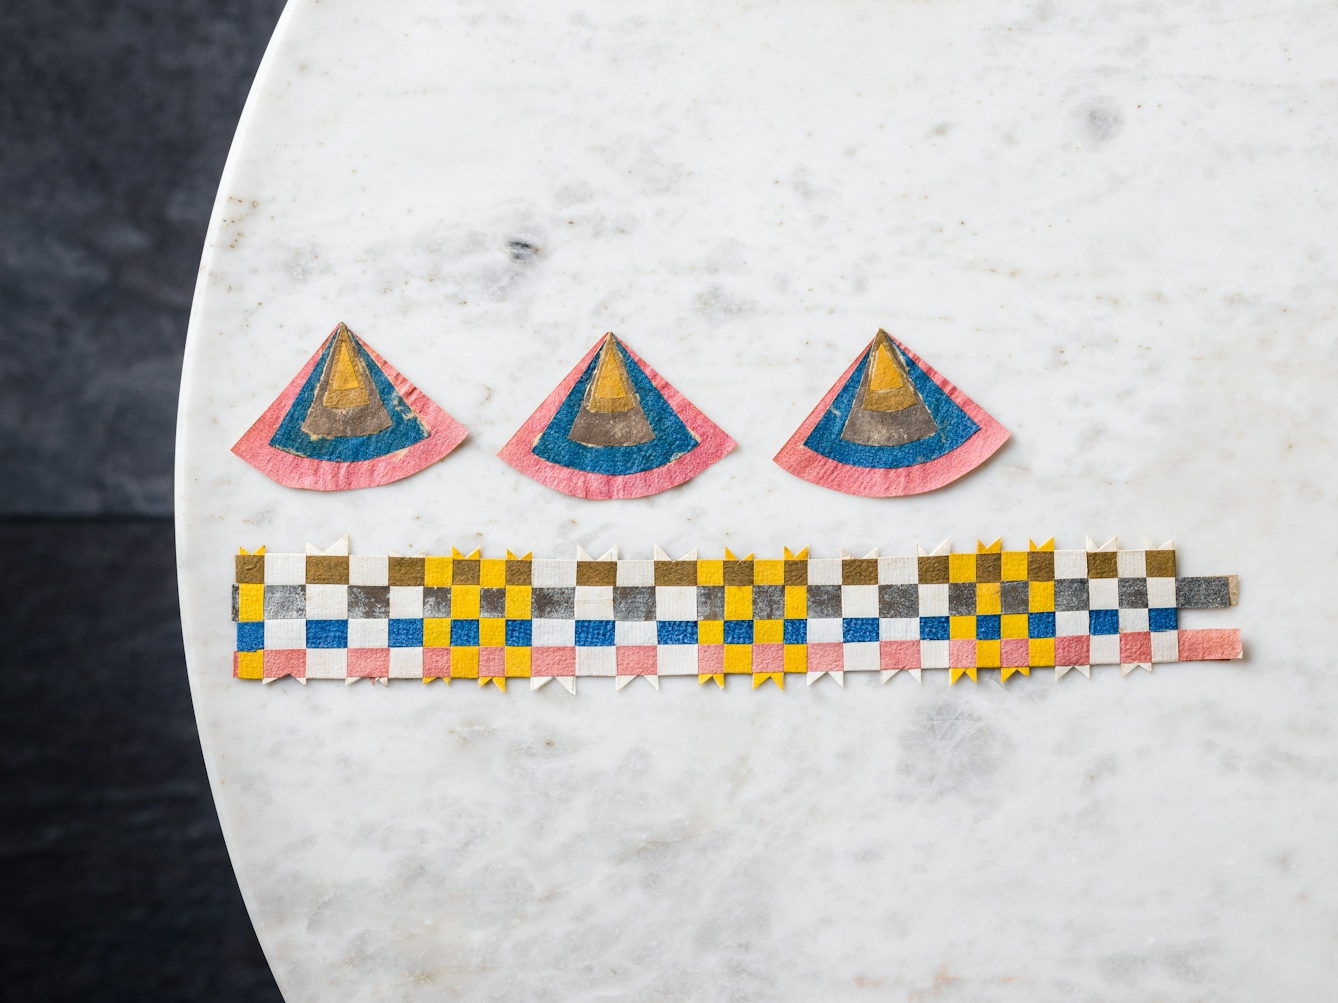 Three pizza slice-shaped pieces of paper jewellery and a woven paper crown-style band.